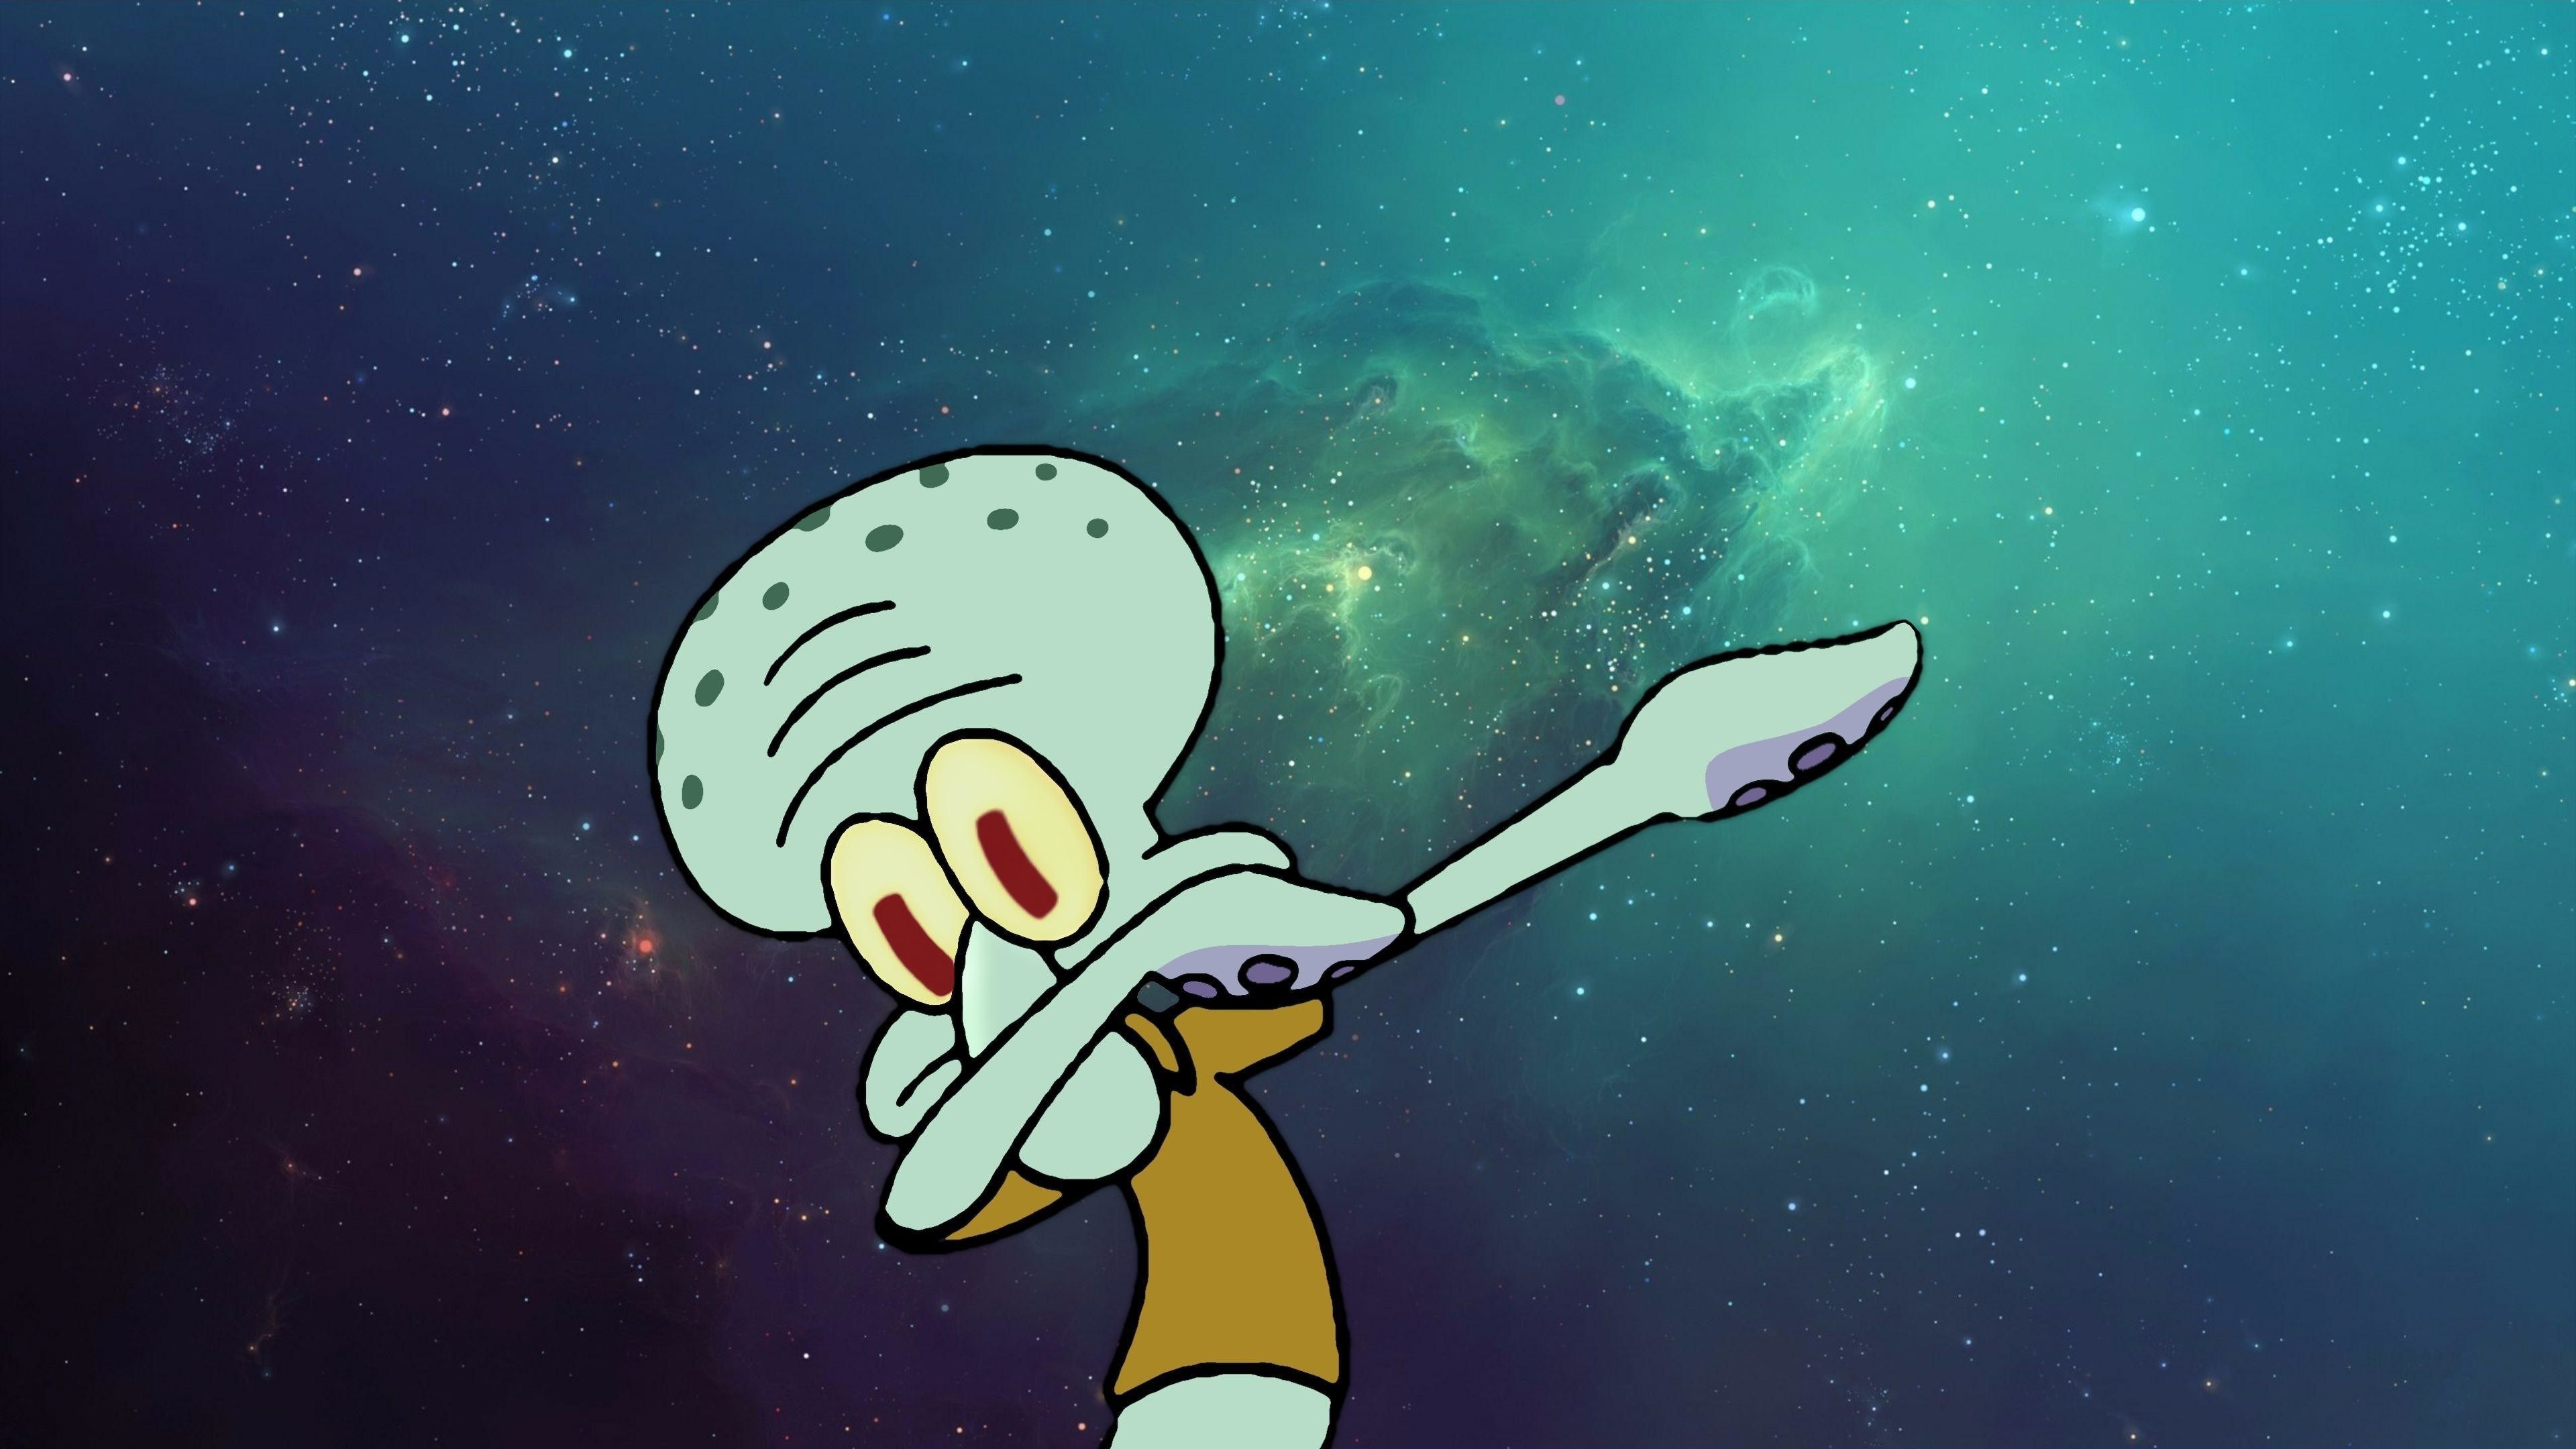 A cartoon character is standing in front of the stars - Squidward, dab dance